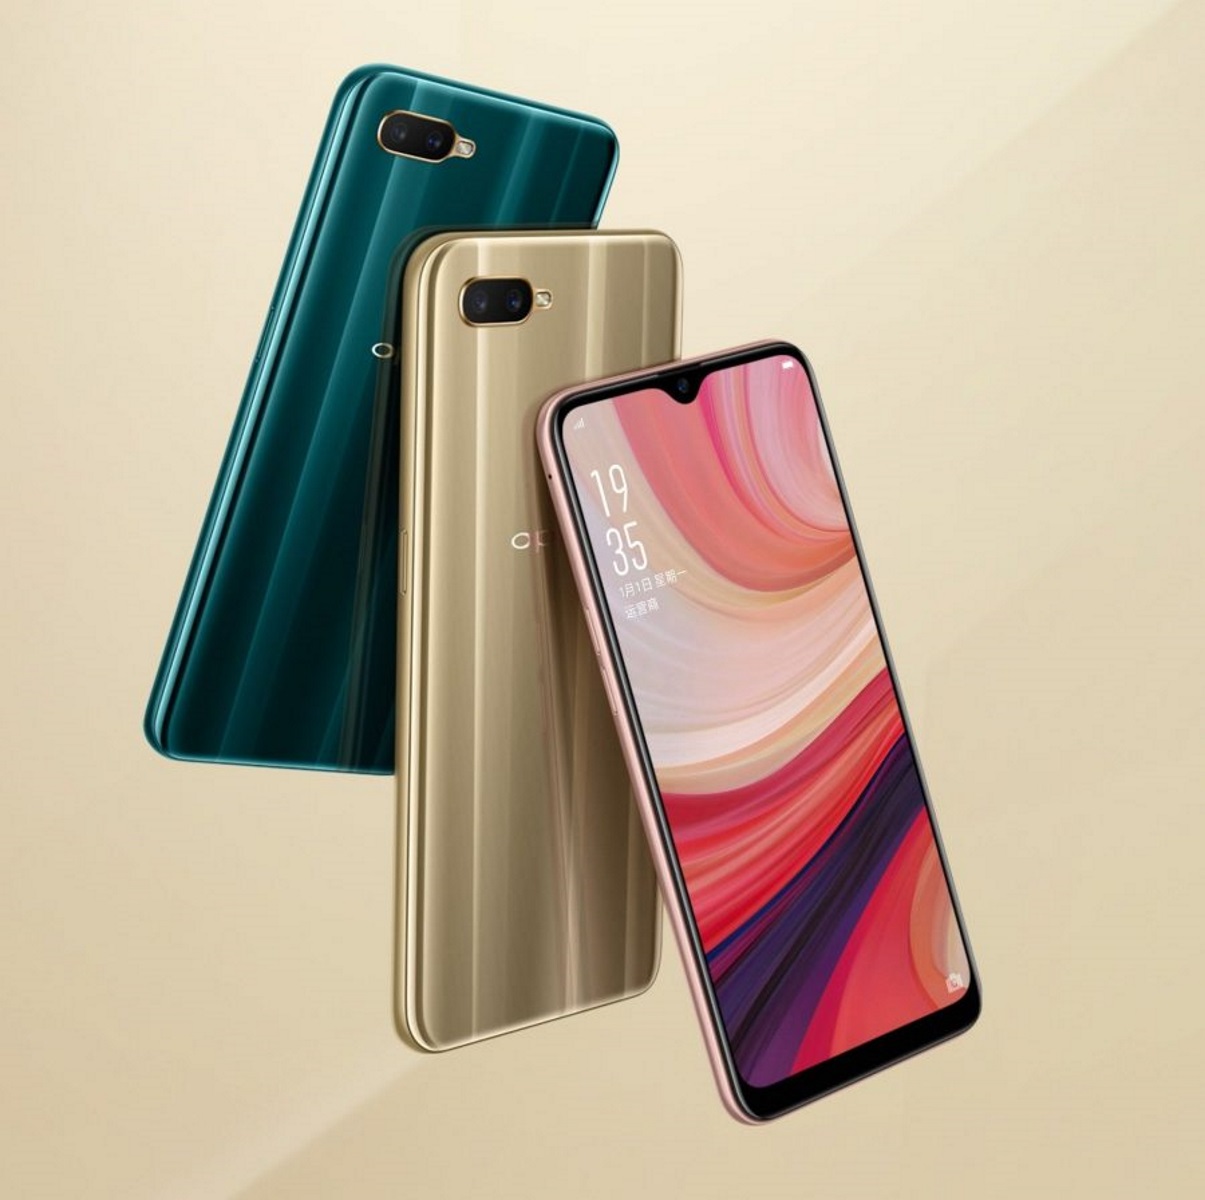 OPPO A7 Usung Android Oreo 8.1, Baterai 4.230 mAh Hyperboost